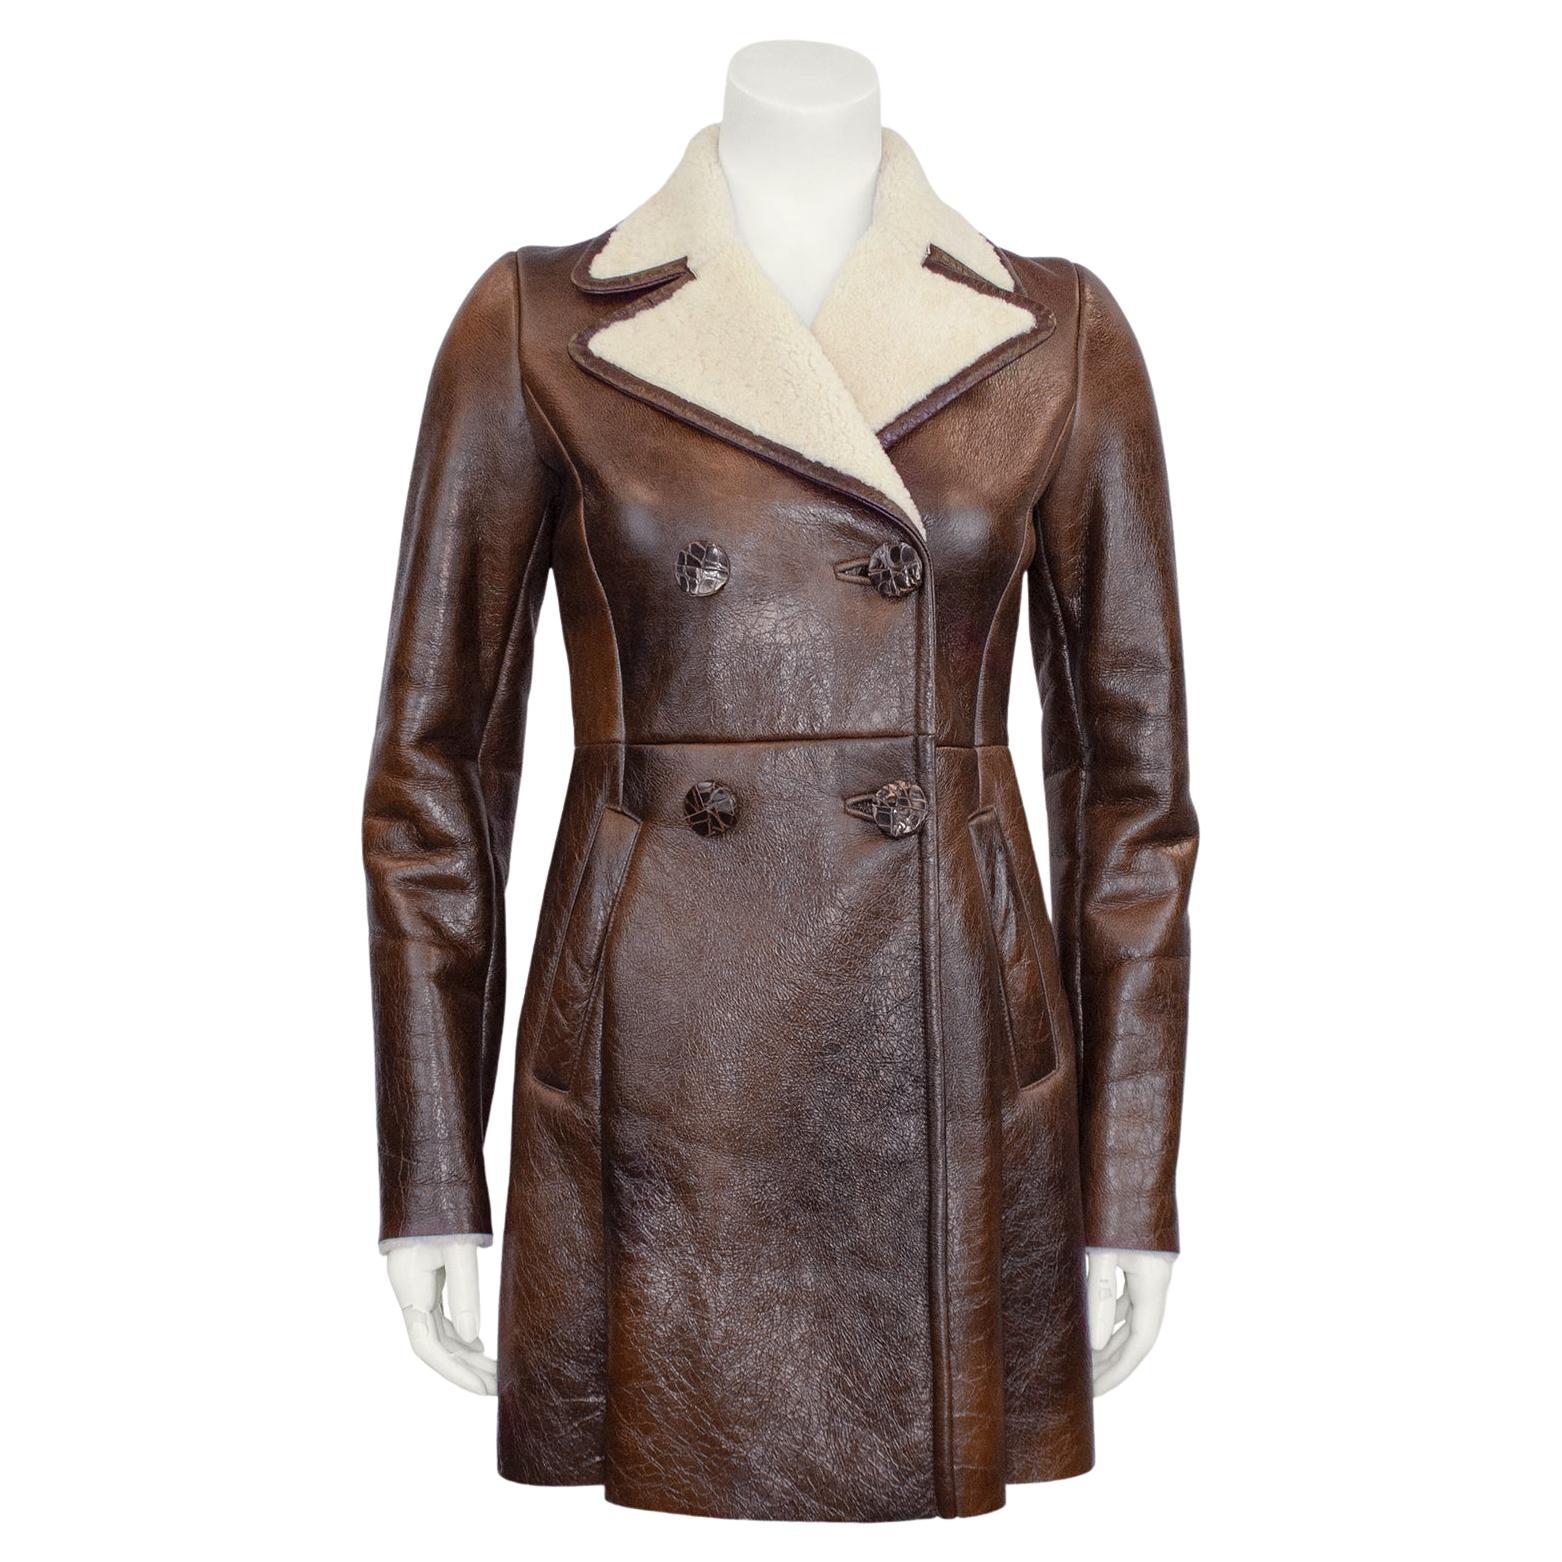 Early 2000s Prada Brown Leather and Shearling Coat